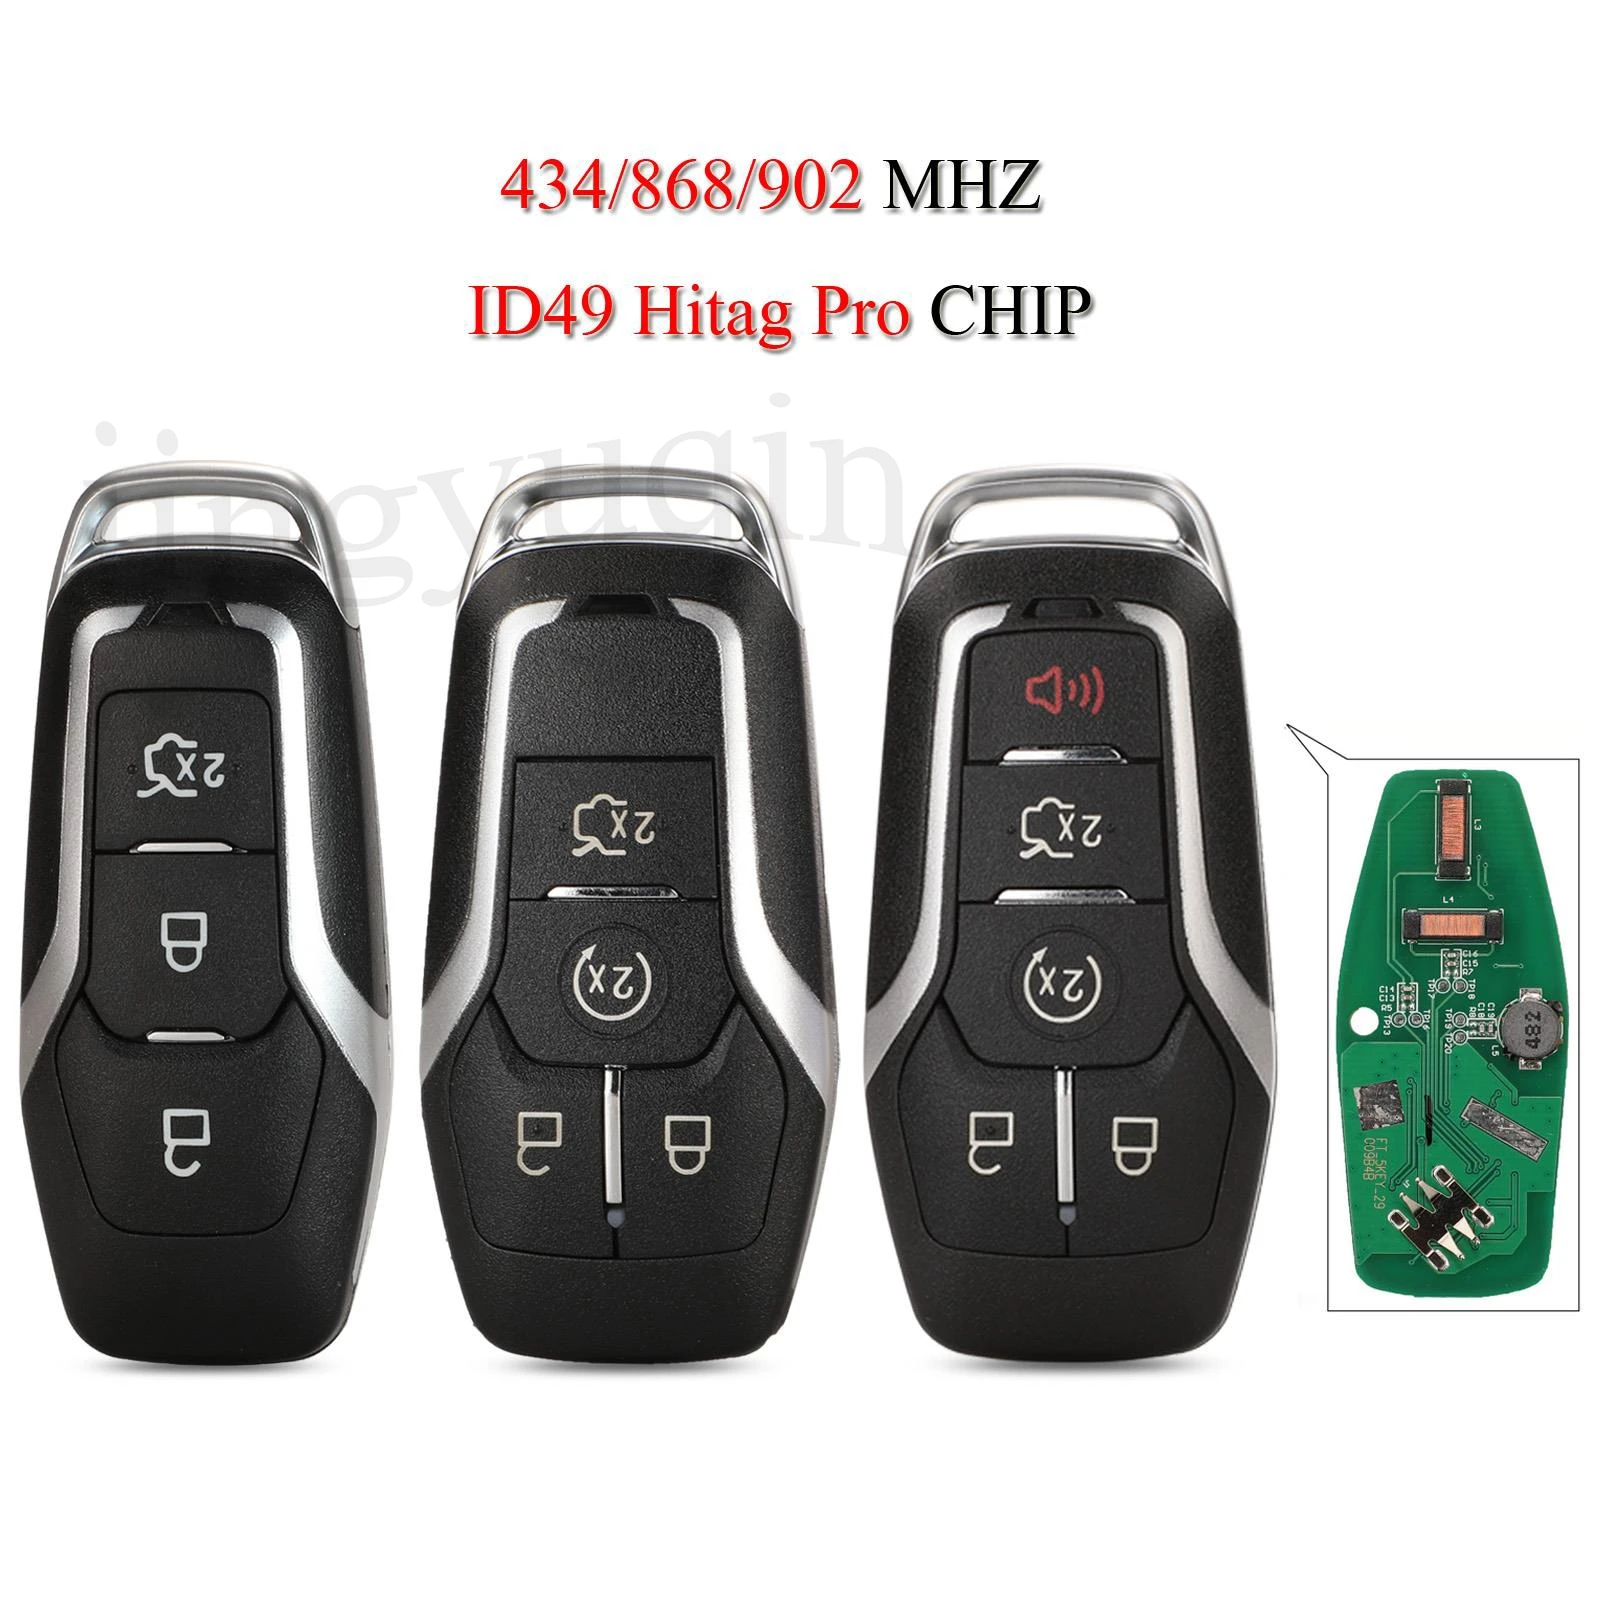 

jingyuqin Remote Smart Car Key For Ford Mustang Edge Explorer Fusion Mondeo Kuka 3/4/5Buttons 433.92/434/868/902Mhz ID49 Chip